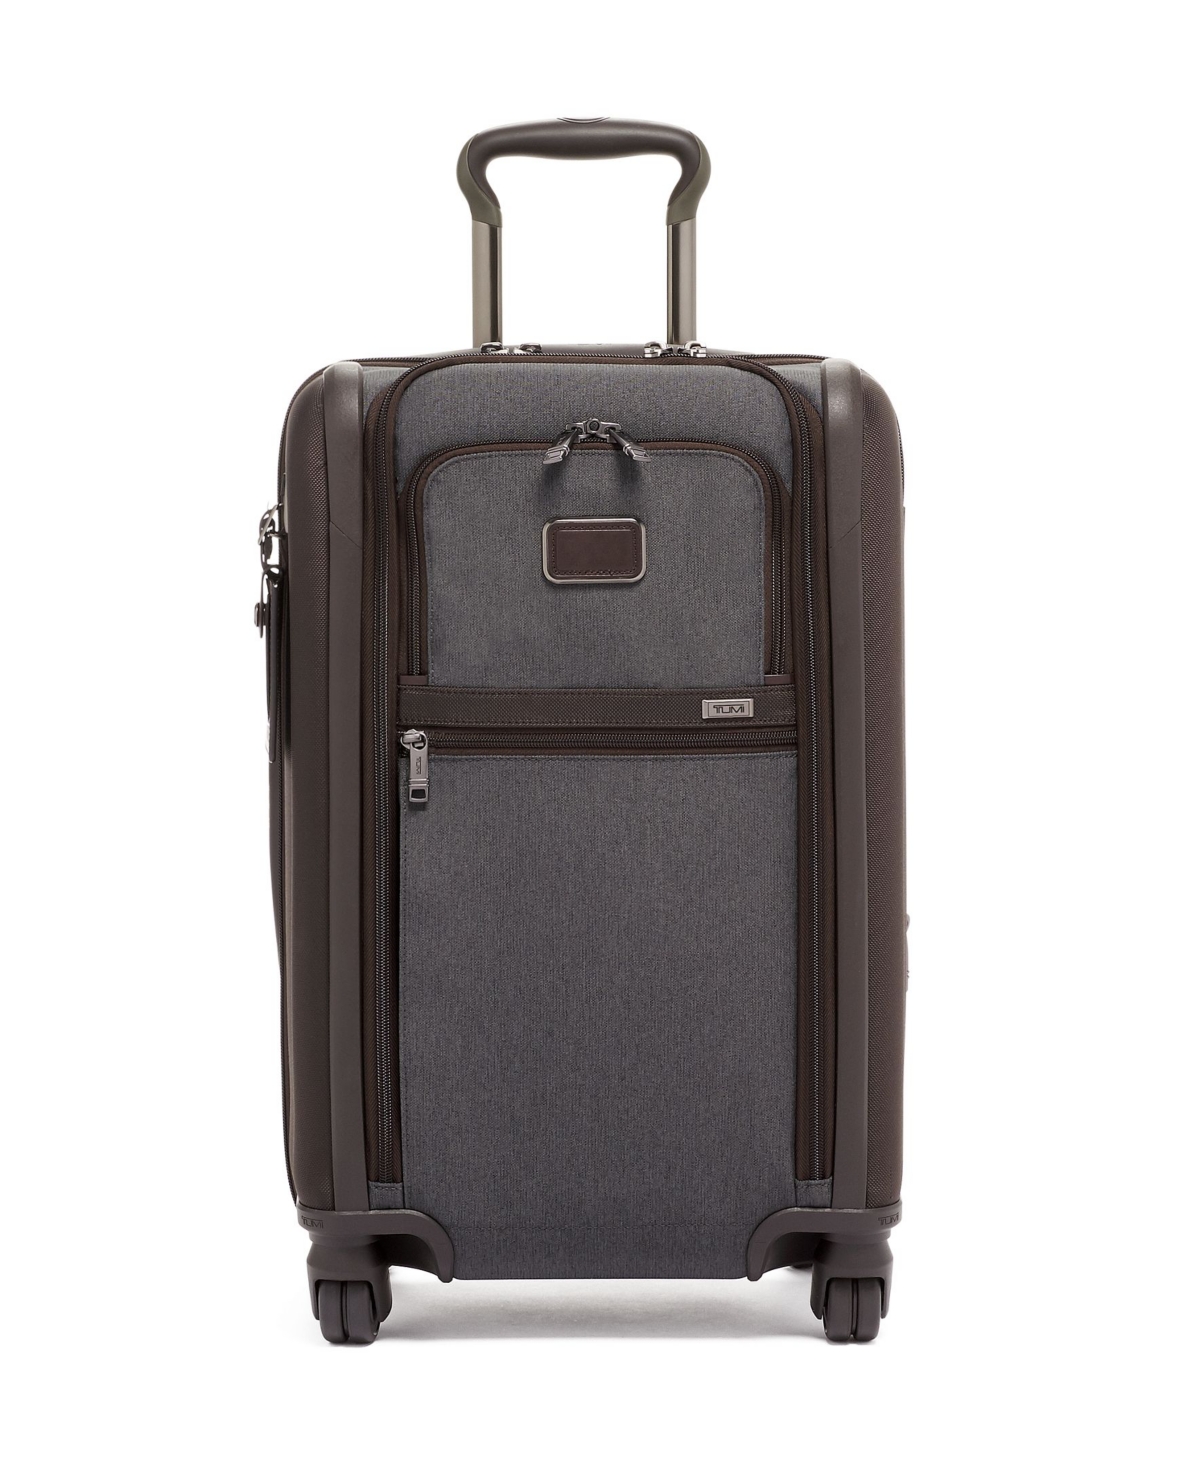 Alpha 3 International Expandable 4 Wheeled Carry-On Spinner Suitcase - Anthracite